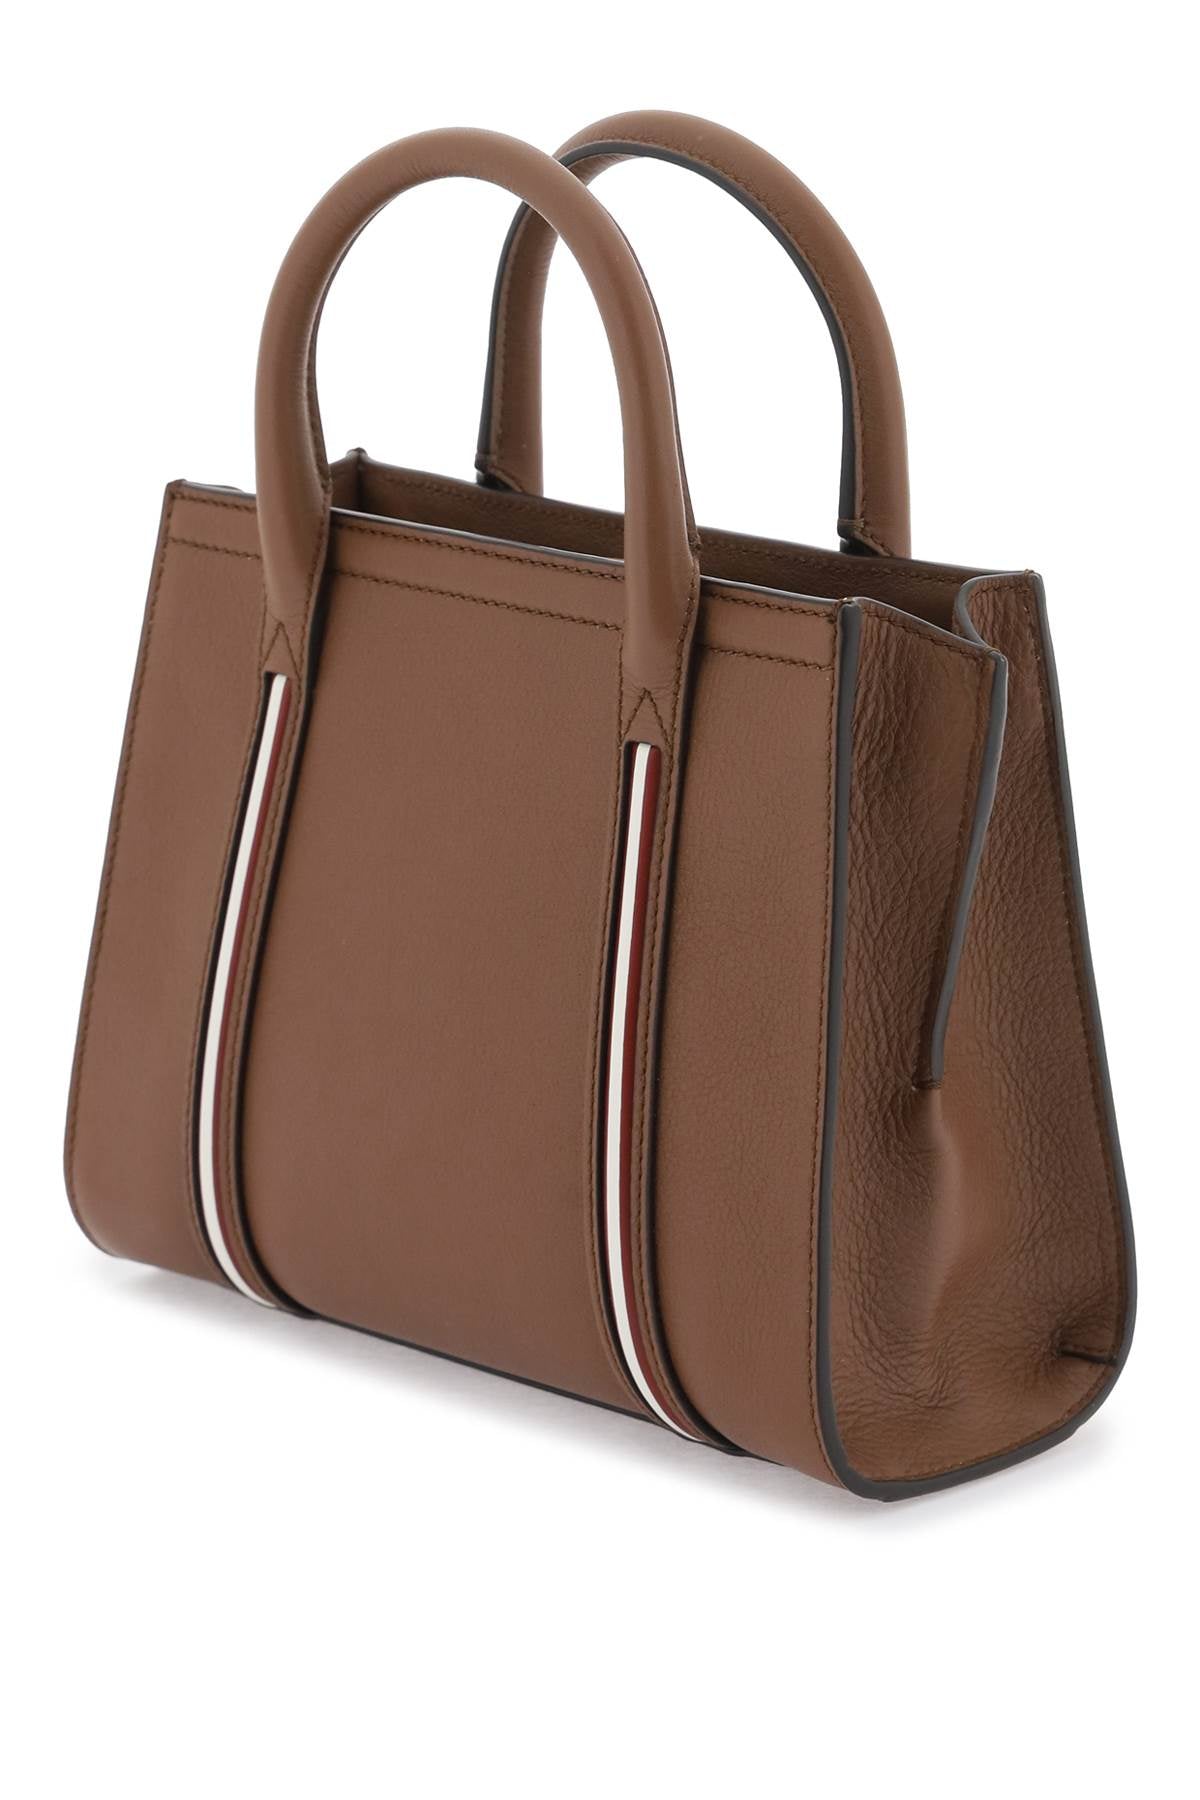 BALLY Small Code Tote in Hammered Leather with Iconic Stripe and Gold Accents